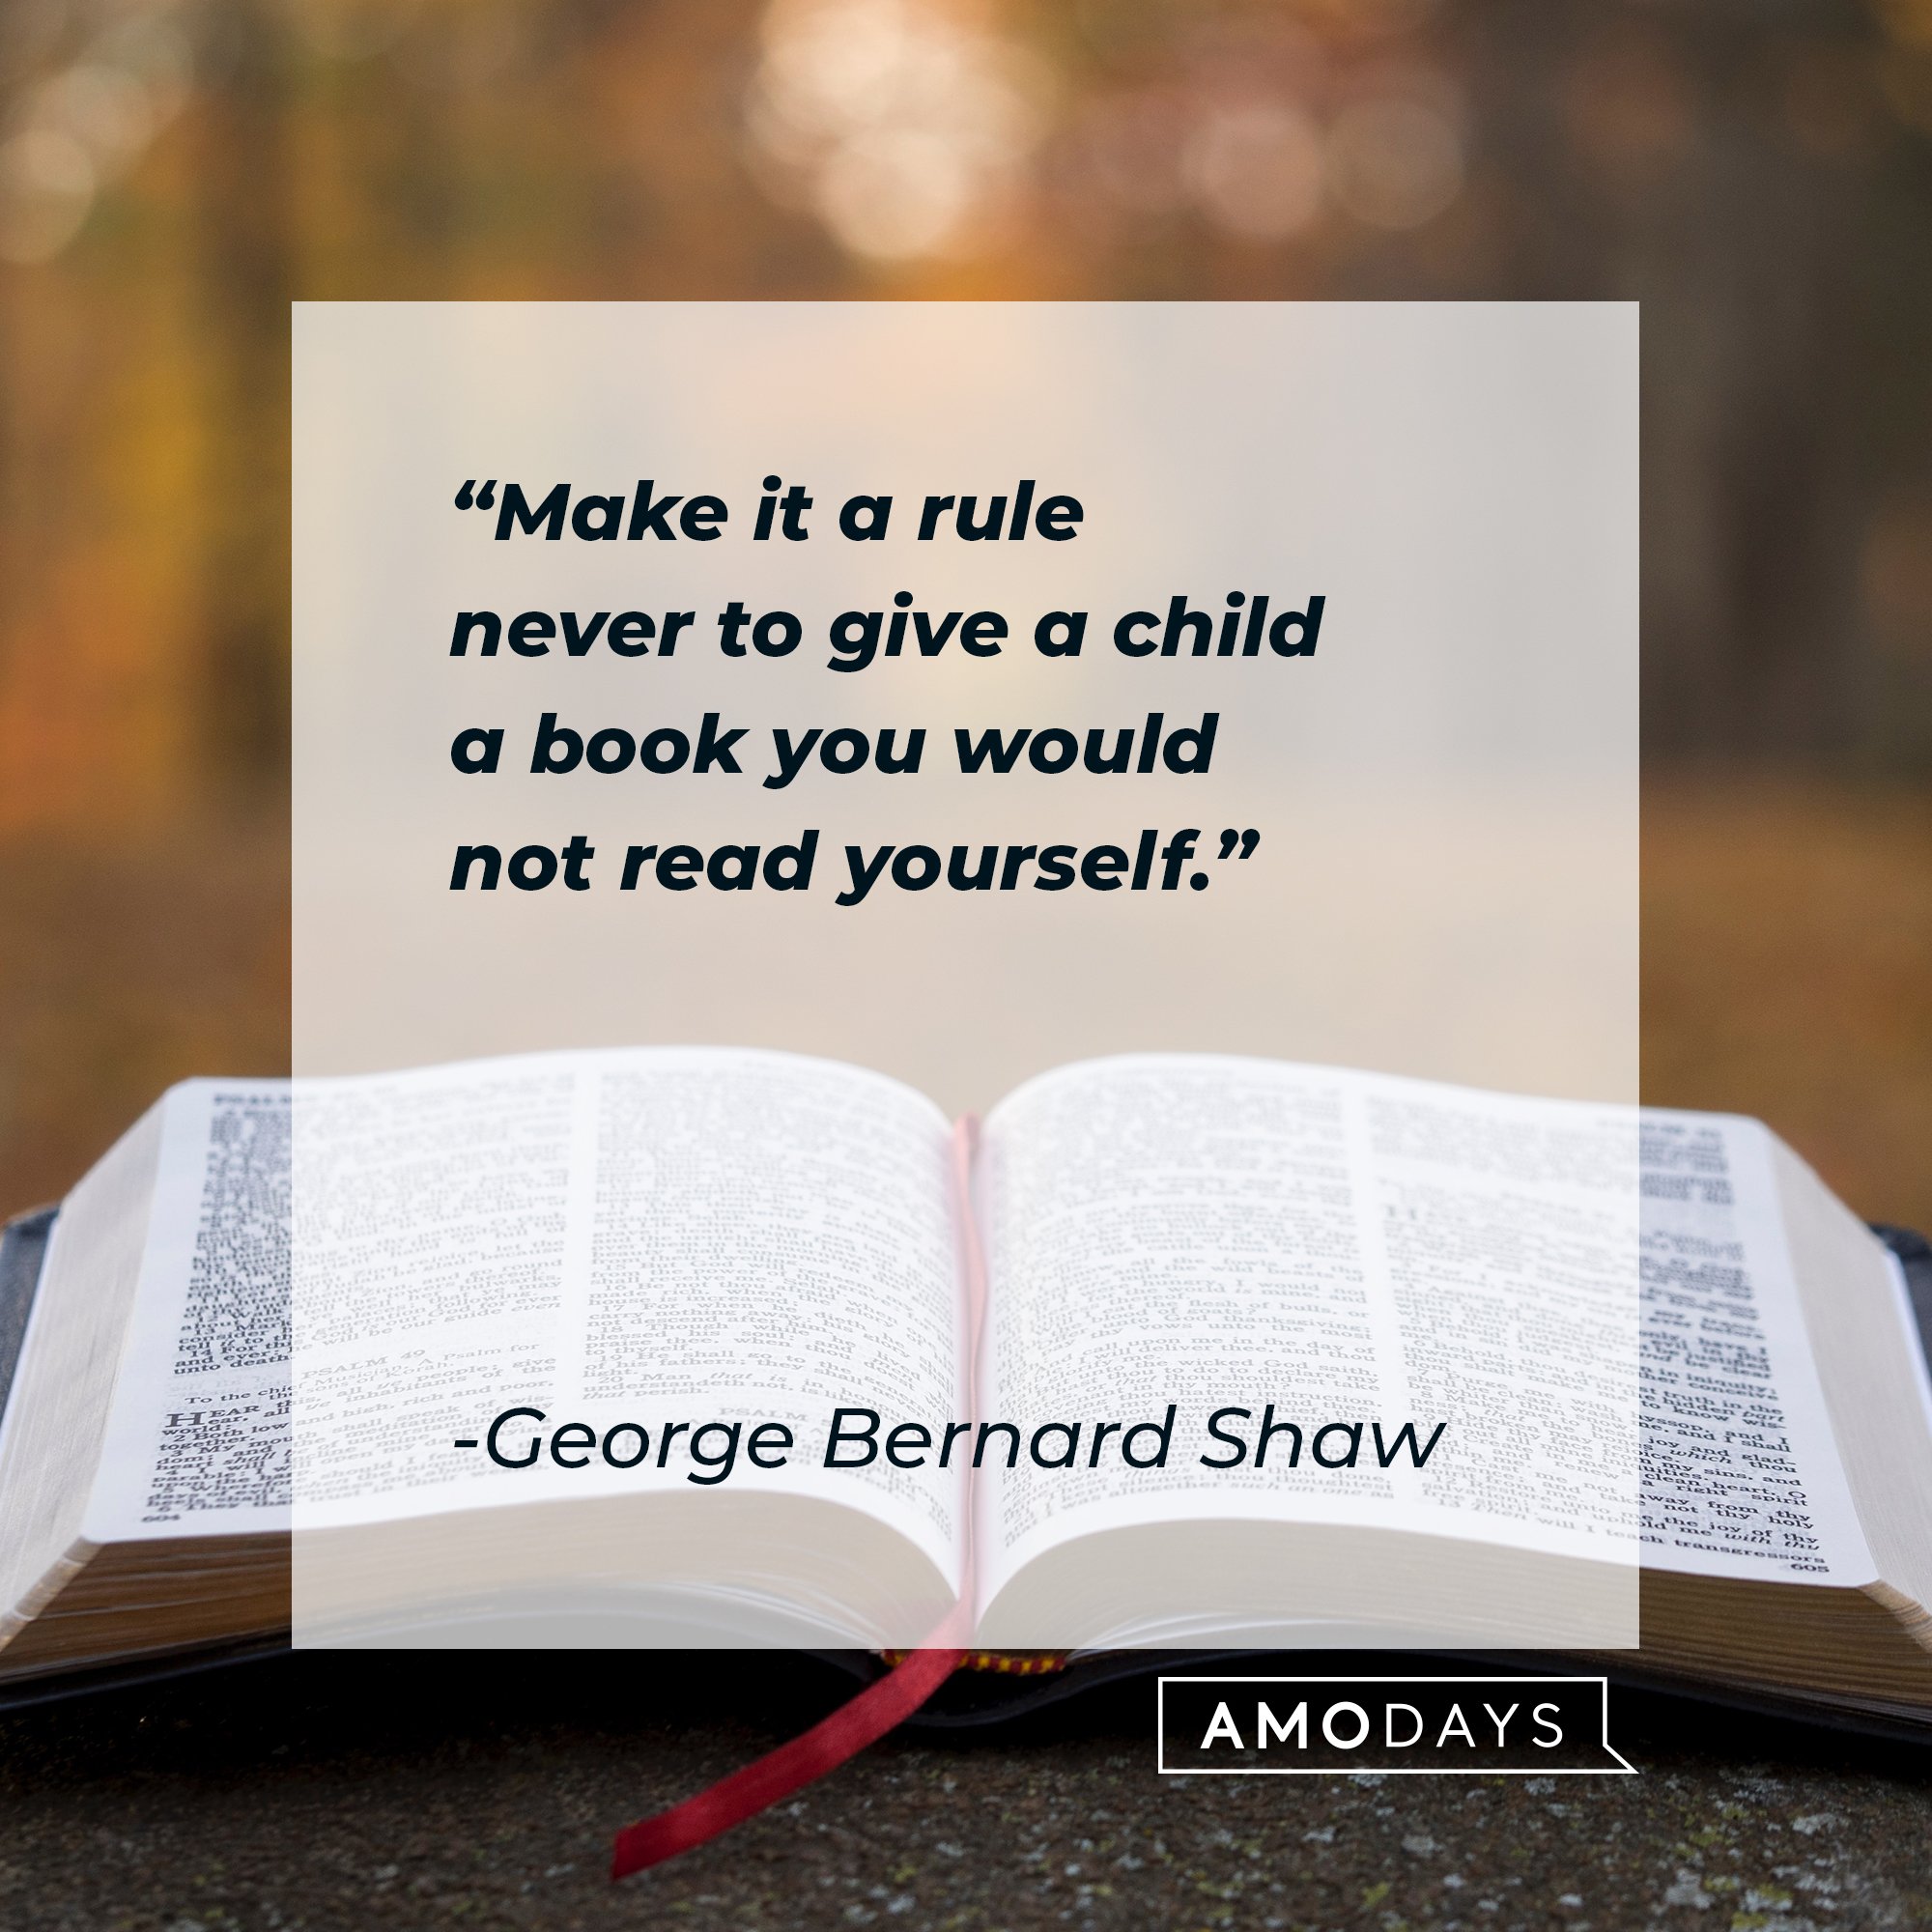 George Bernard Shaw’s quote: "Make it a rule never to give a child a book you would not read yourself." | Image: AmoDays